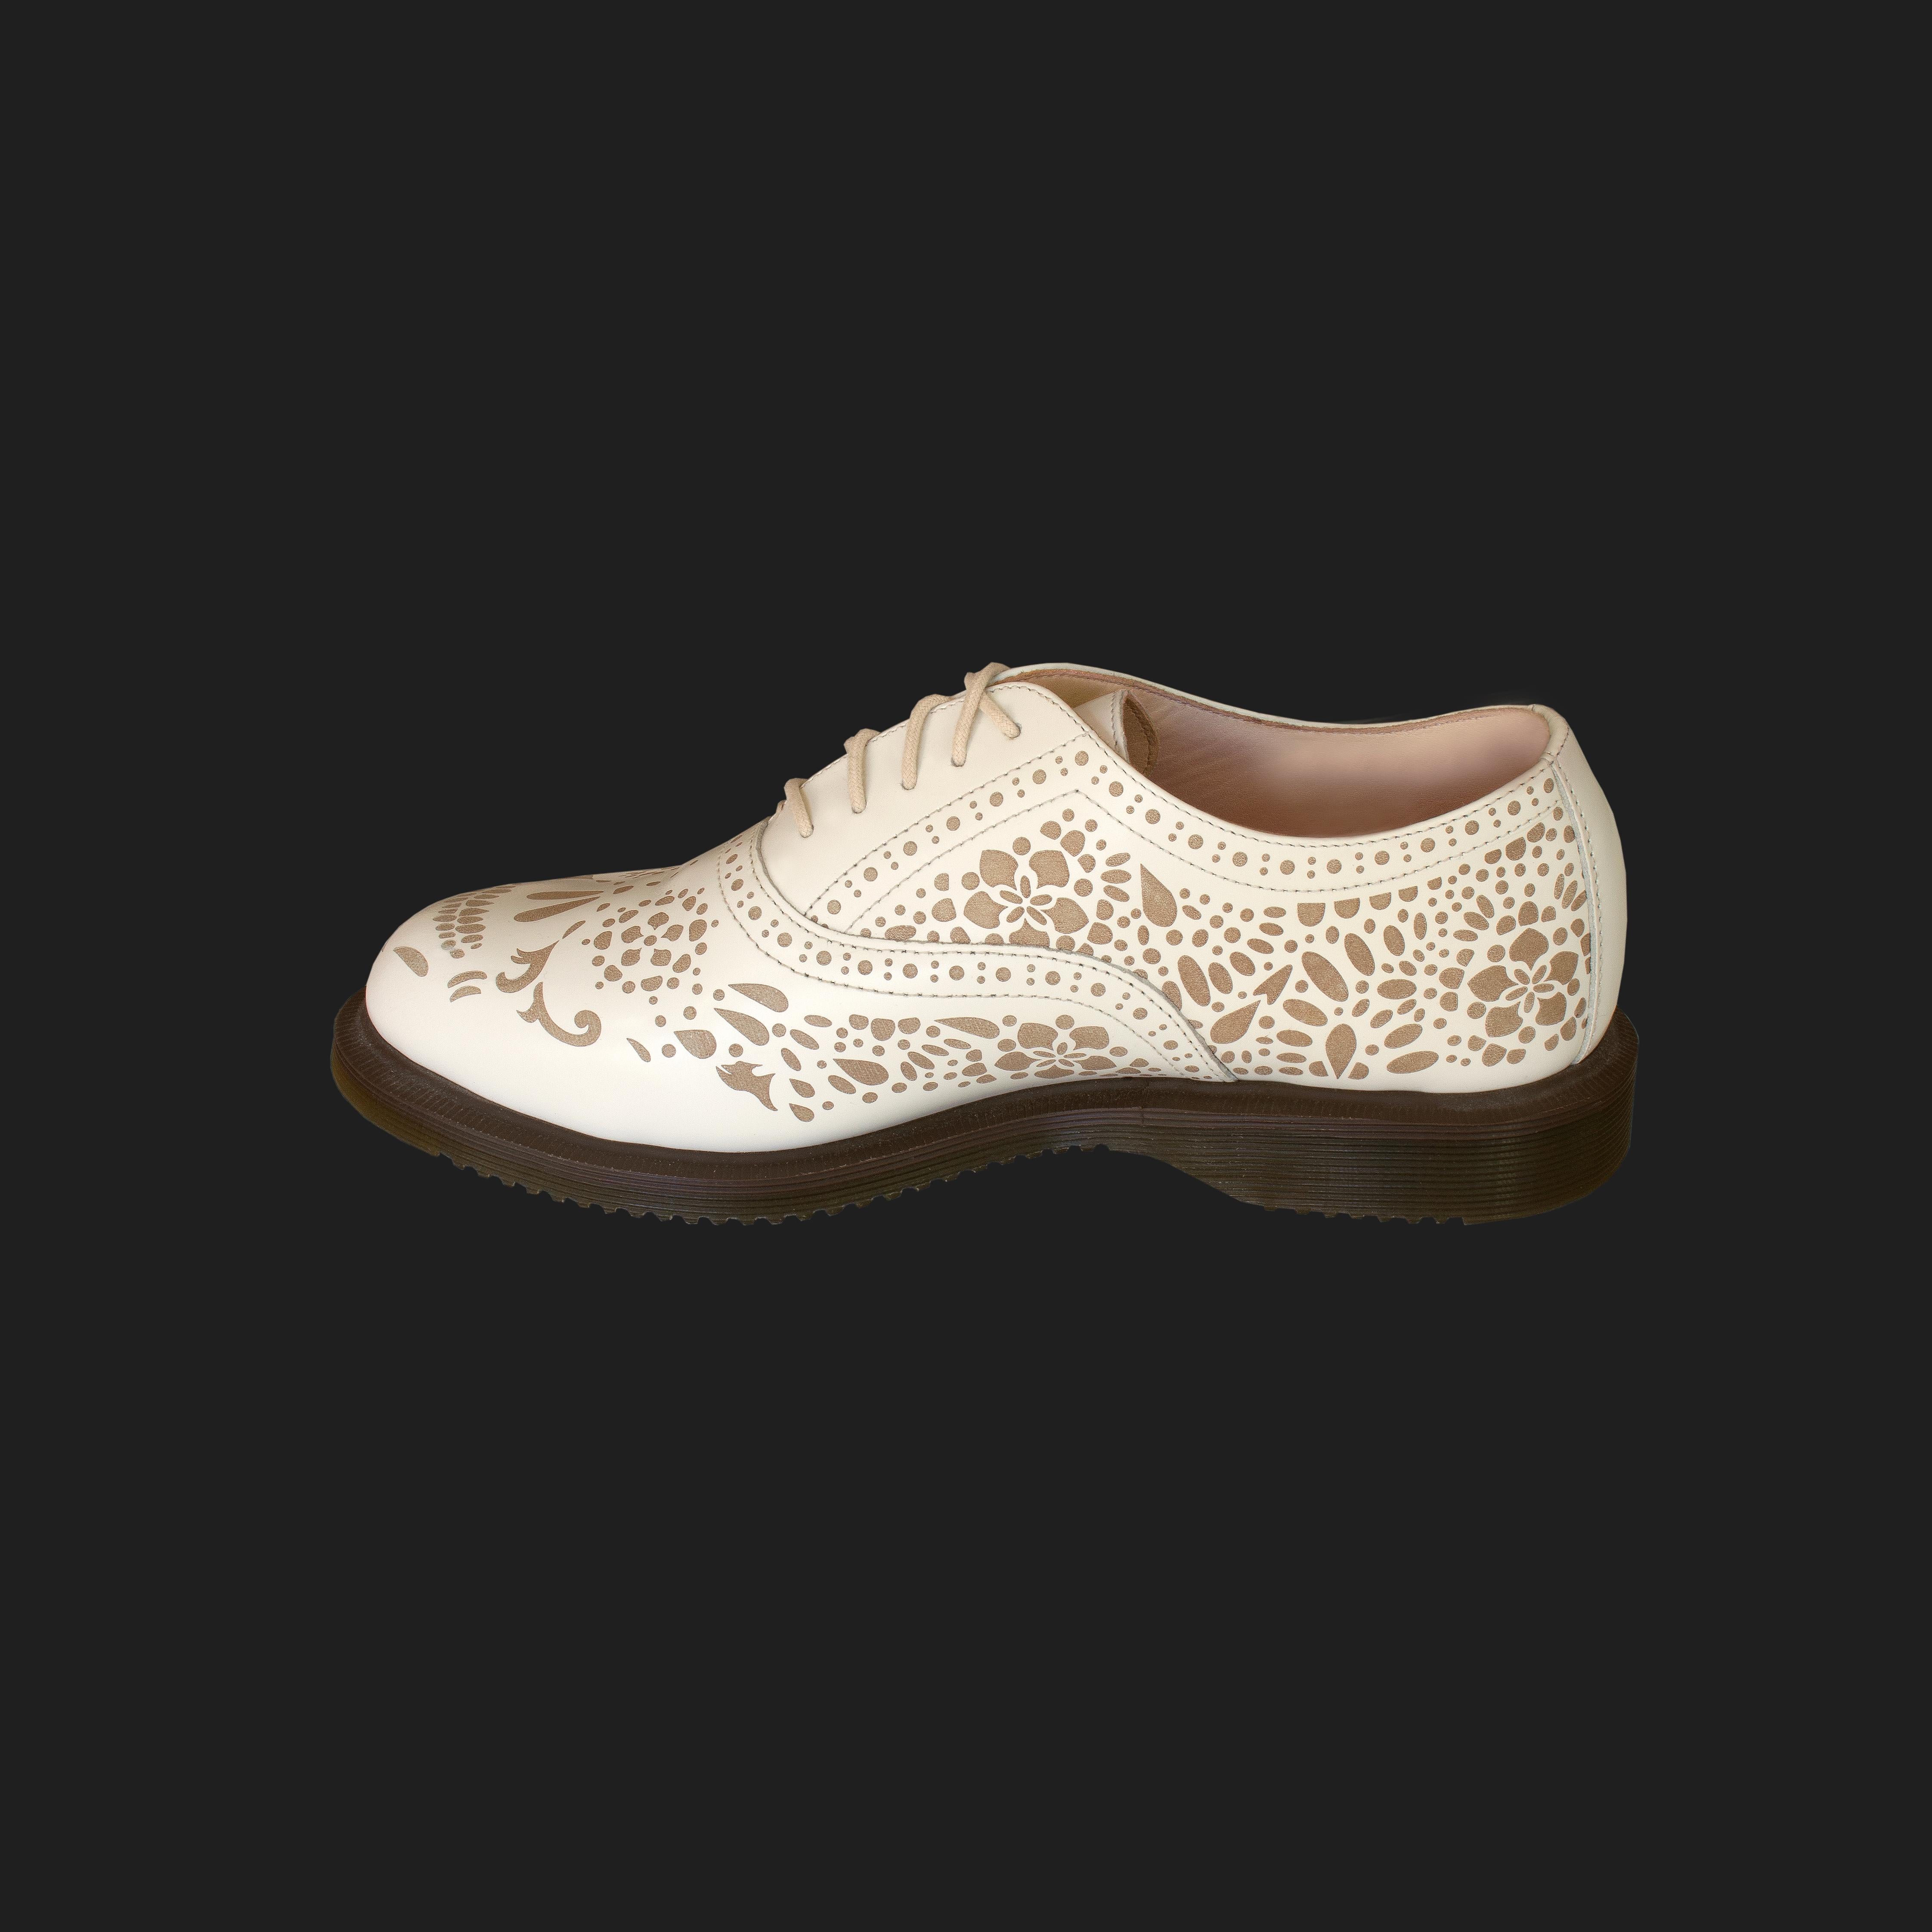 Product Details: DR MARTENS - Kensington Aila Skull Etched Brogues - UK 5  - Off White + Tan Detailing - Tan Leather Lining - Five Eyelet Lace Up Fastening - Thick Rubber Air Ware Sole
Label: DR MARTENS
Fabric Content: Leather / Rubber
Size: UK